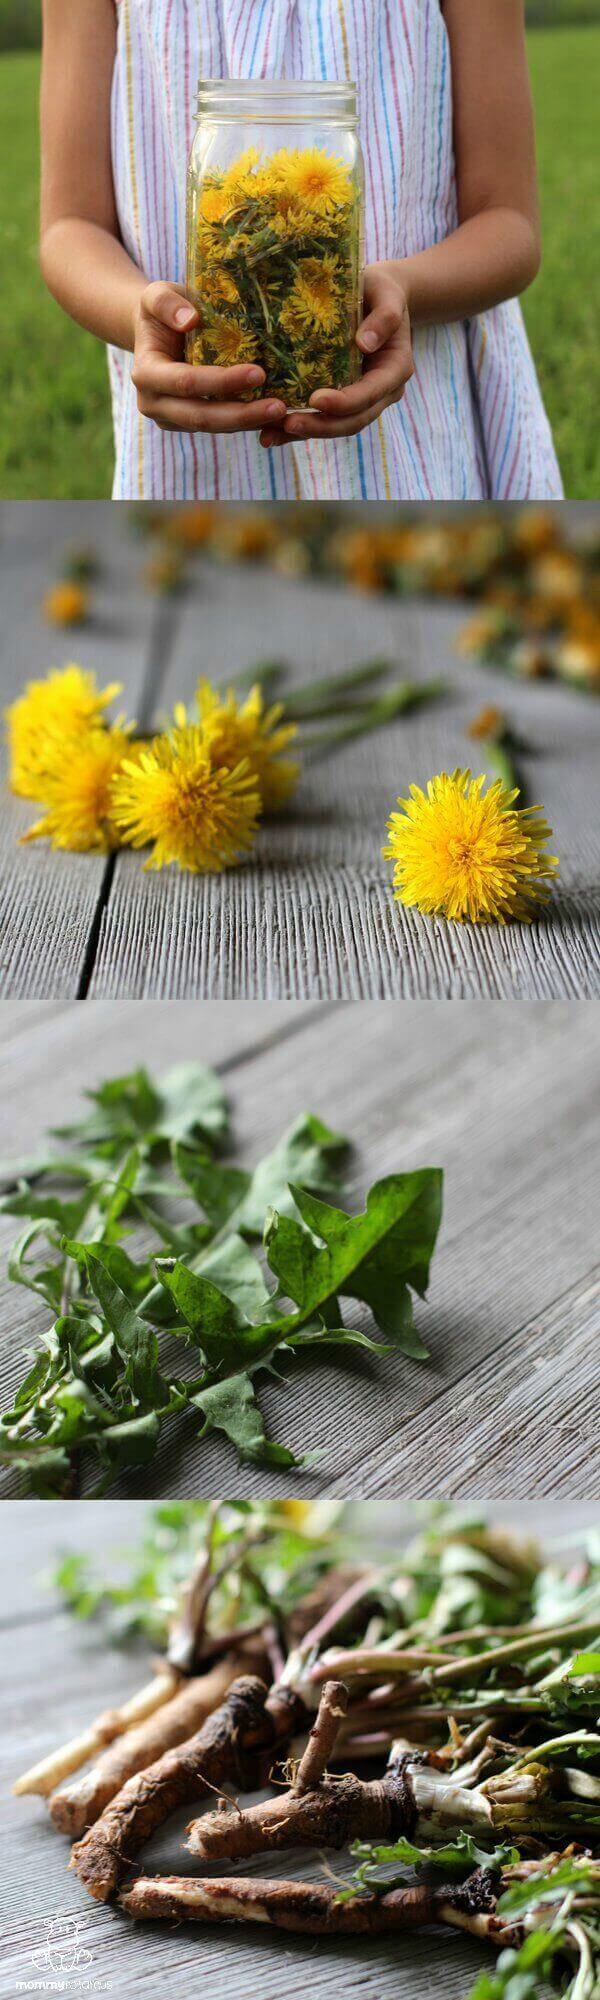 “Dandelion is a generous plant in that every part of it can be used as food or medicine,” writes Rosalee de la Forêt in her gorgeous new book, Alchemy of Herbs. And it’s true. Dandelion flowers, roots and leaves can be made into salads, teas, decoctions, tinctures, syrups, wines, skin healing salves and more. Here's an overview of how to use them.